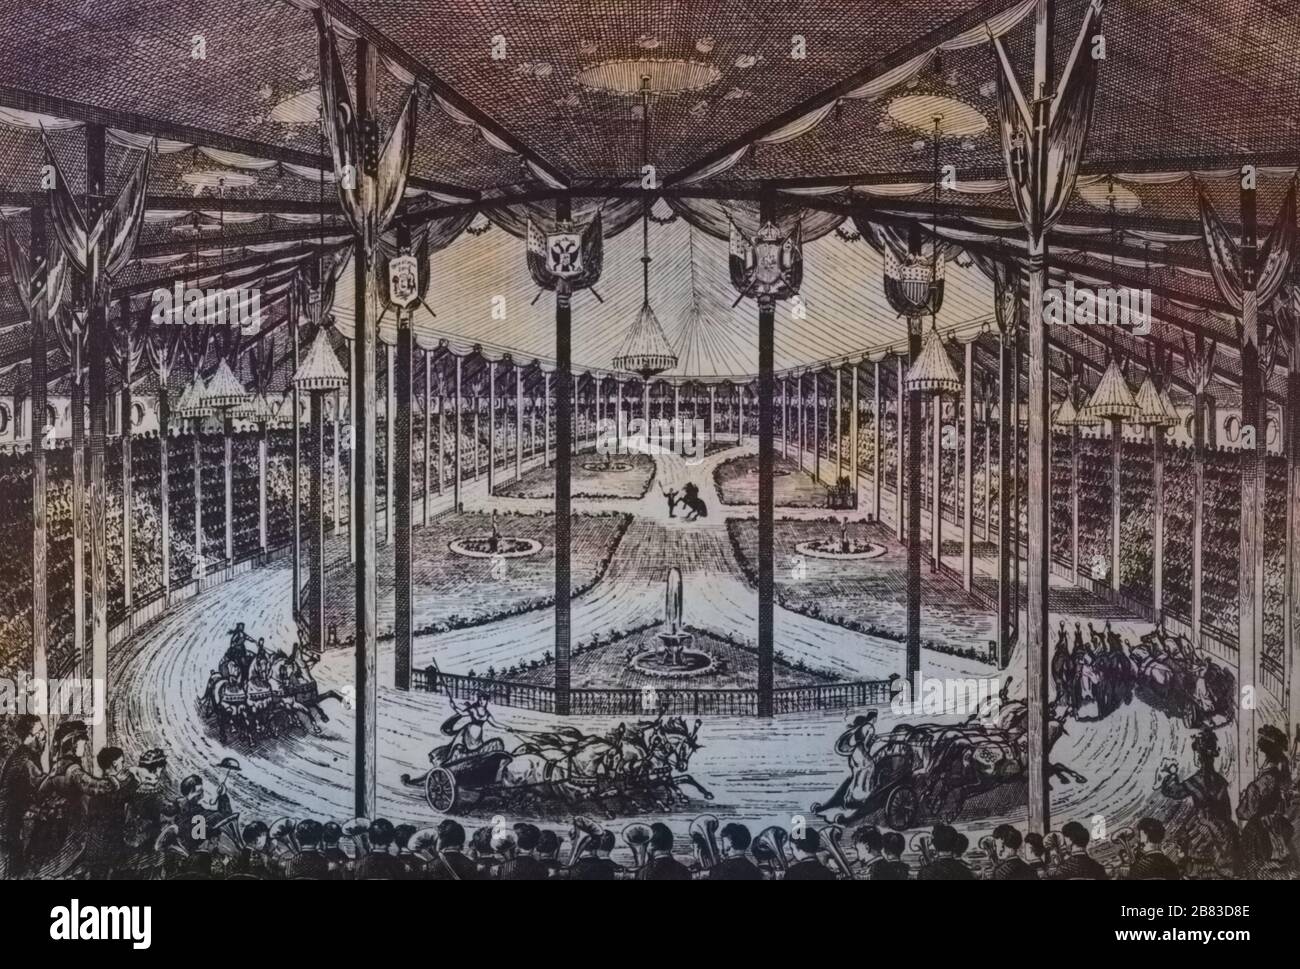 Illustration of the interior view of Phineas Taylor Barnum's Great Roman Hippodrome in Madison Square Garden, New York City, featuring people riding horse-drawn chariots, published in the Daily Graphic Newspaper, 1874. From the New York Public Library. Note: Image has been digitally colorized using a modern process. Colors may not be period-accurate. () Stock Photo